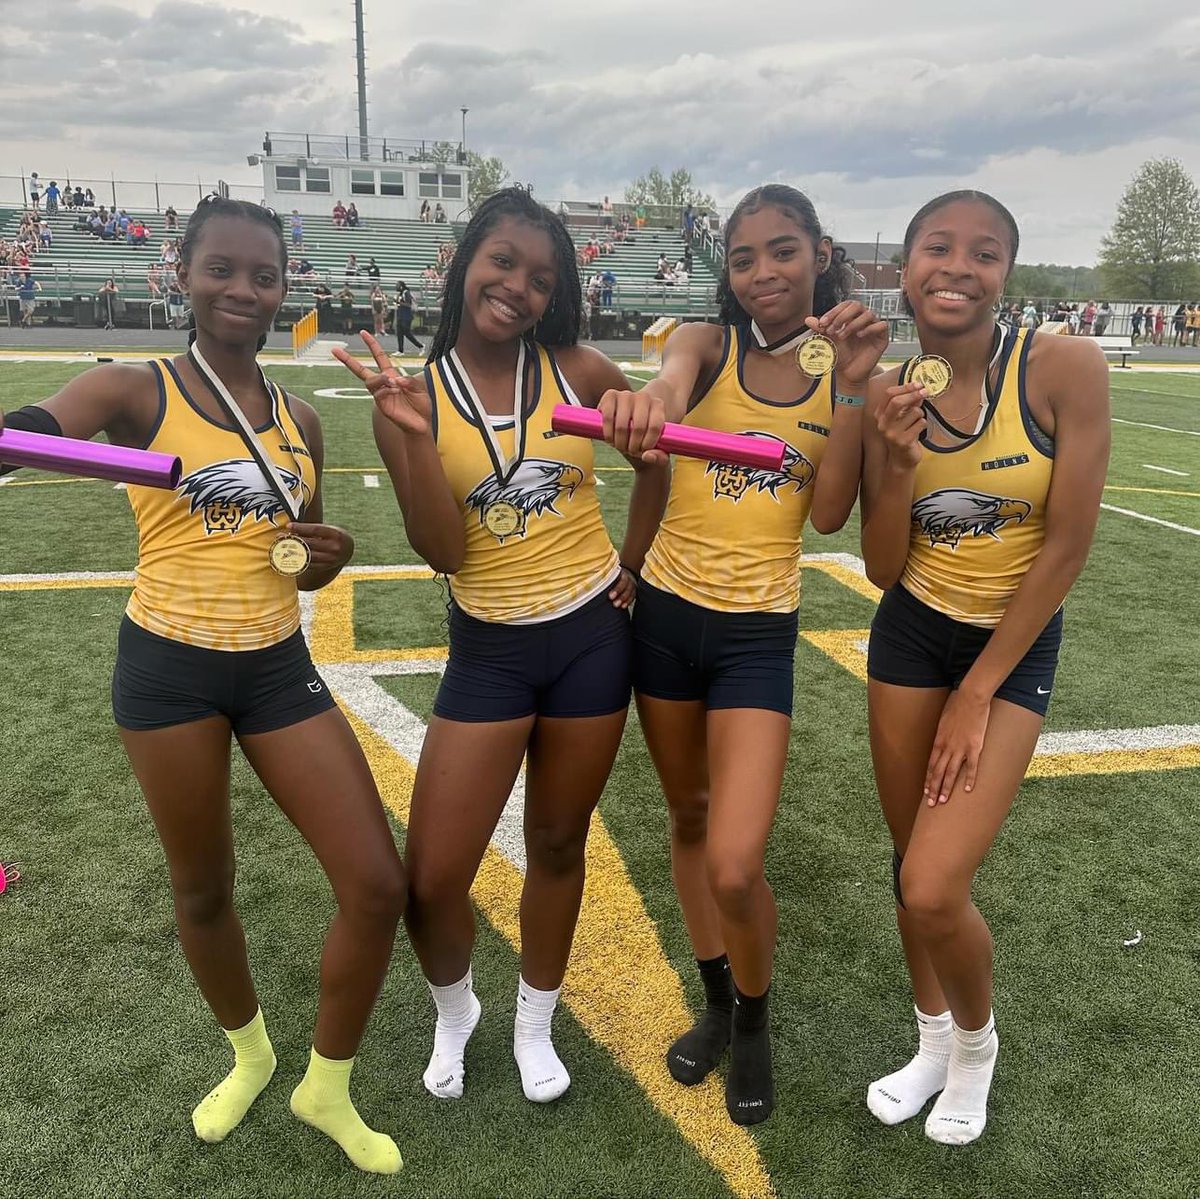 We broke the @ECC_Sports record in our relays during the Middle School Track and Field Championship

4x1- 52.28 (ECC RECORD 🏆)
4x2-1.51:23 
4x4-4.23:97 (ECC RECORD 🏆)

JH @walnutathletics currently hold the ECC record in all three sprint relay

#RecordBreakers
#OurTimeIsNOW